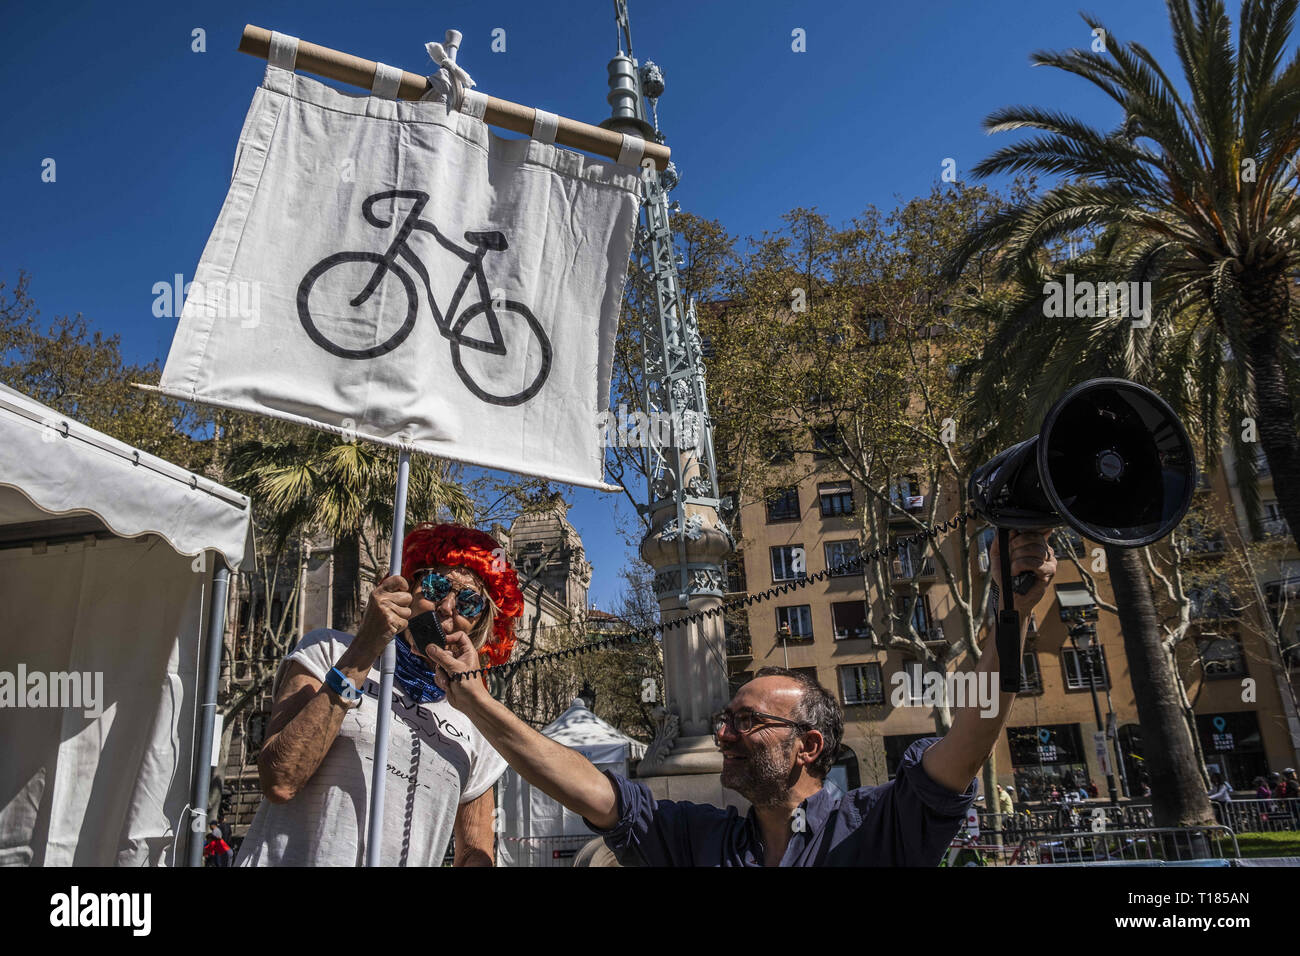 Barcelona, Catalonia, Spain. 24th Mar, 2019. A man wearing a wig is seen speaking on a megaphone while holding a banner during the event.Thousands of people have participated in the Bicicletada Popular 2019 (Popular bike ride) organized by the City Council in order to encourage the use of bicycles in Barcelona. Credit: Paco Freire/SOPA Images/ZUMA Wire/Alamy Live News Stock Photo